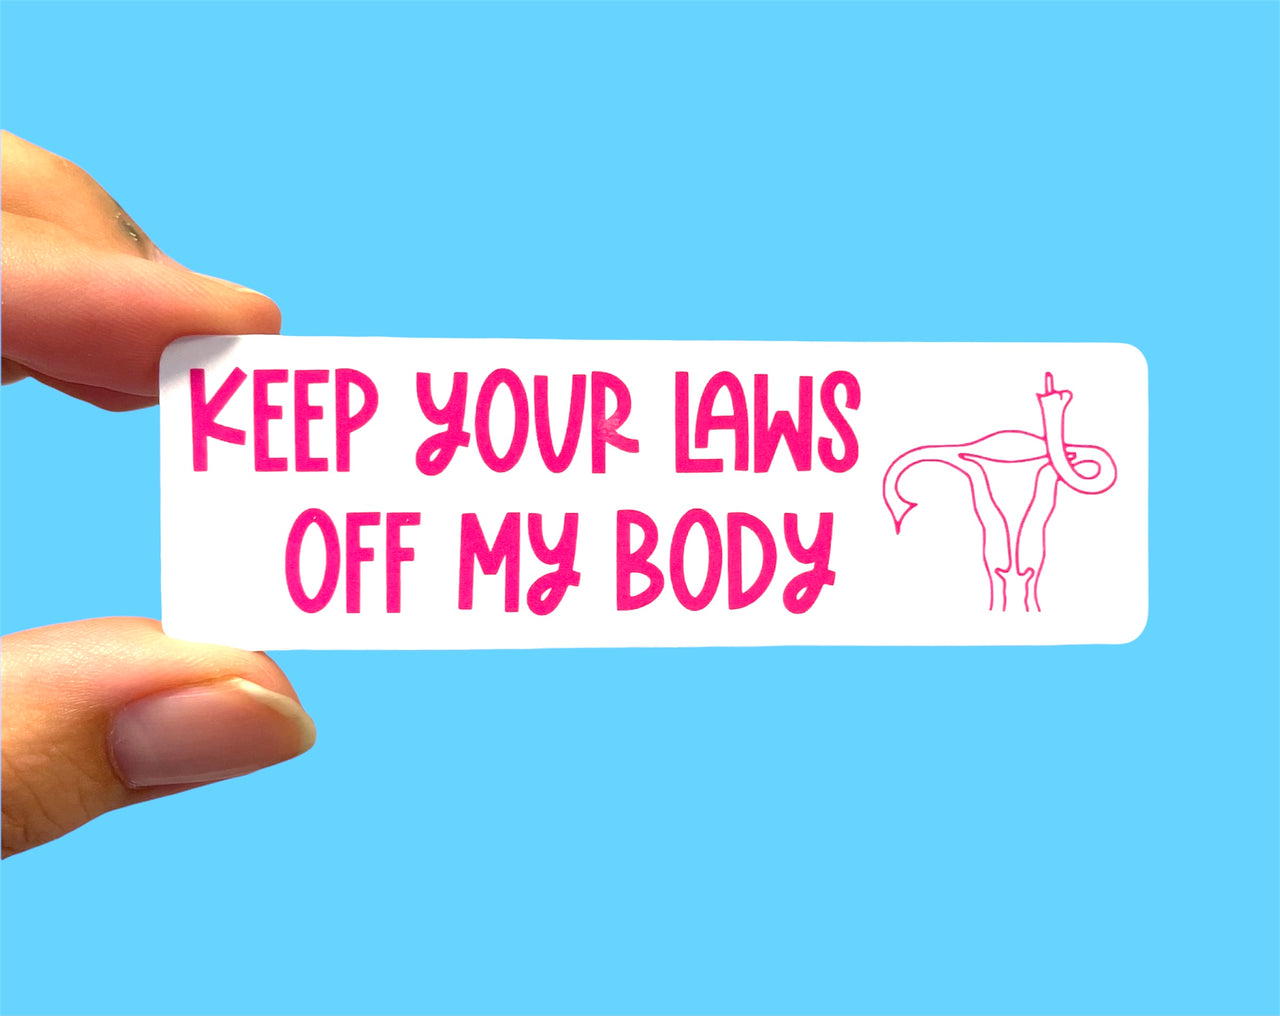 Keep your laws off my body (pack of 3 or 5 stickers)